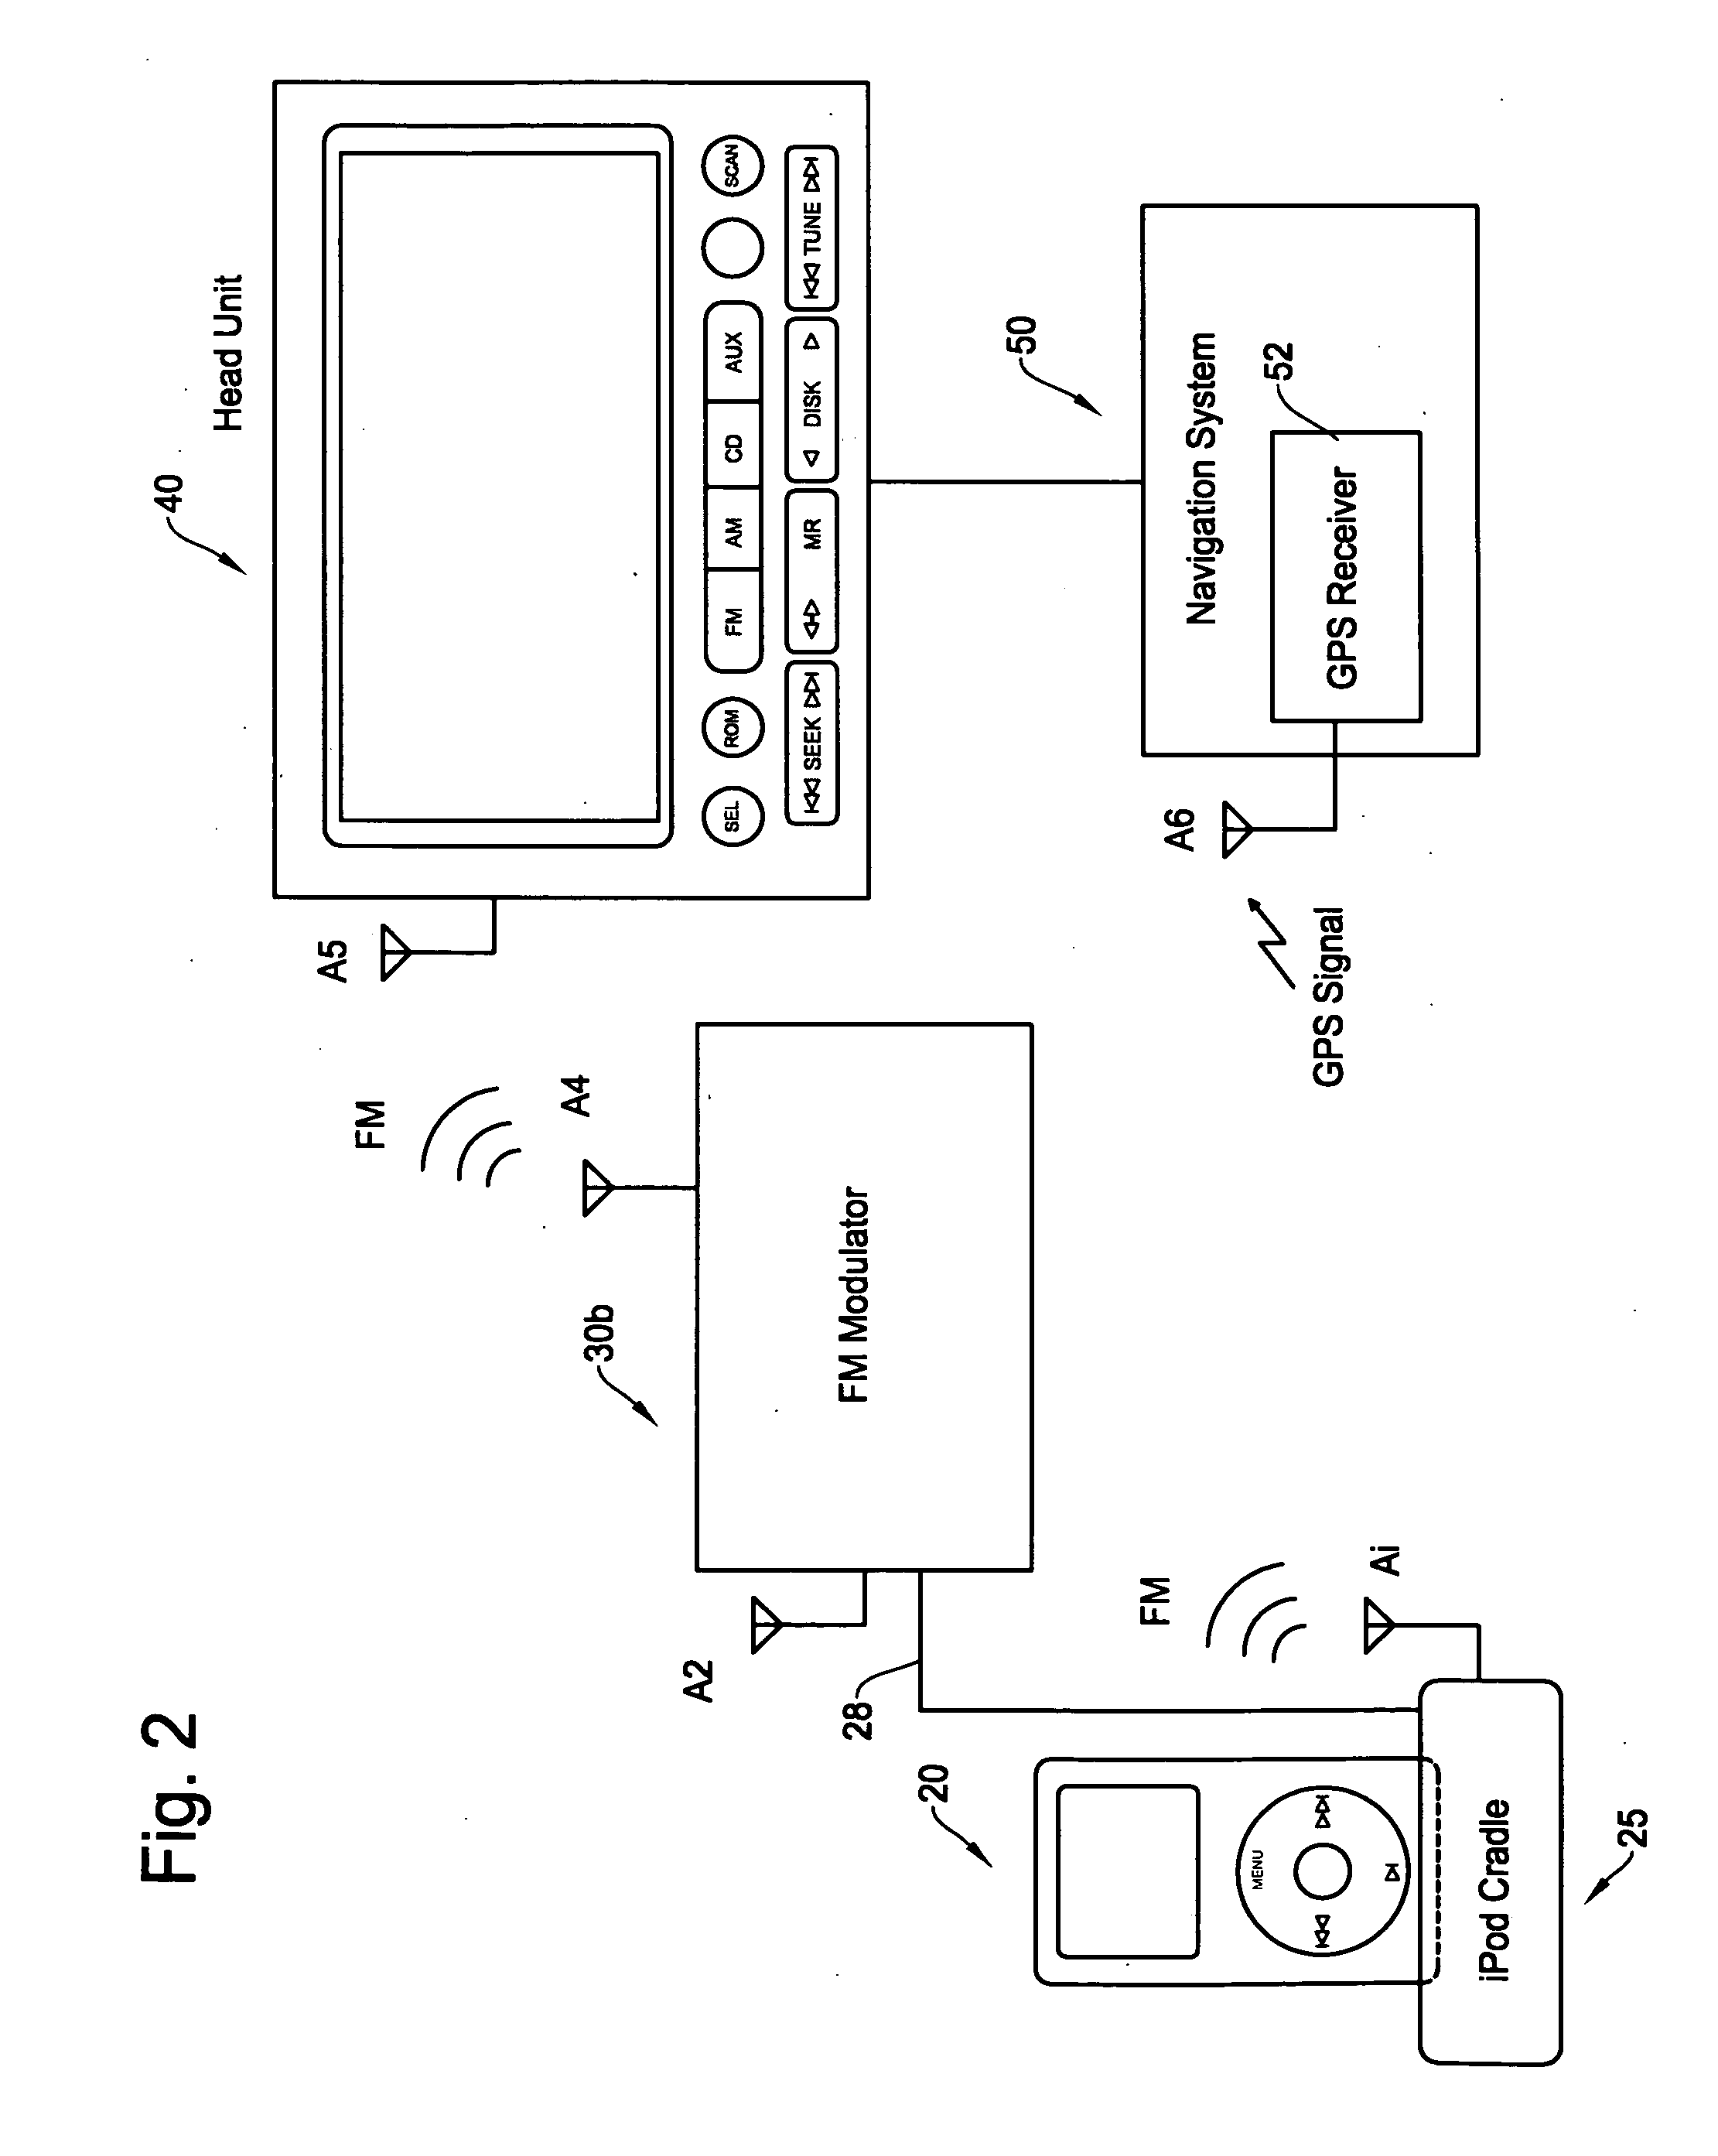 Interference prevention for receiver system incorporating RDS-TMC receiver and FM modulator